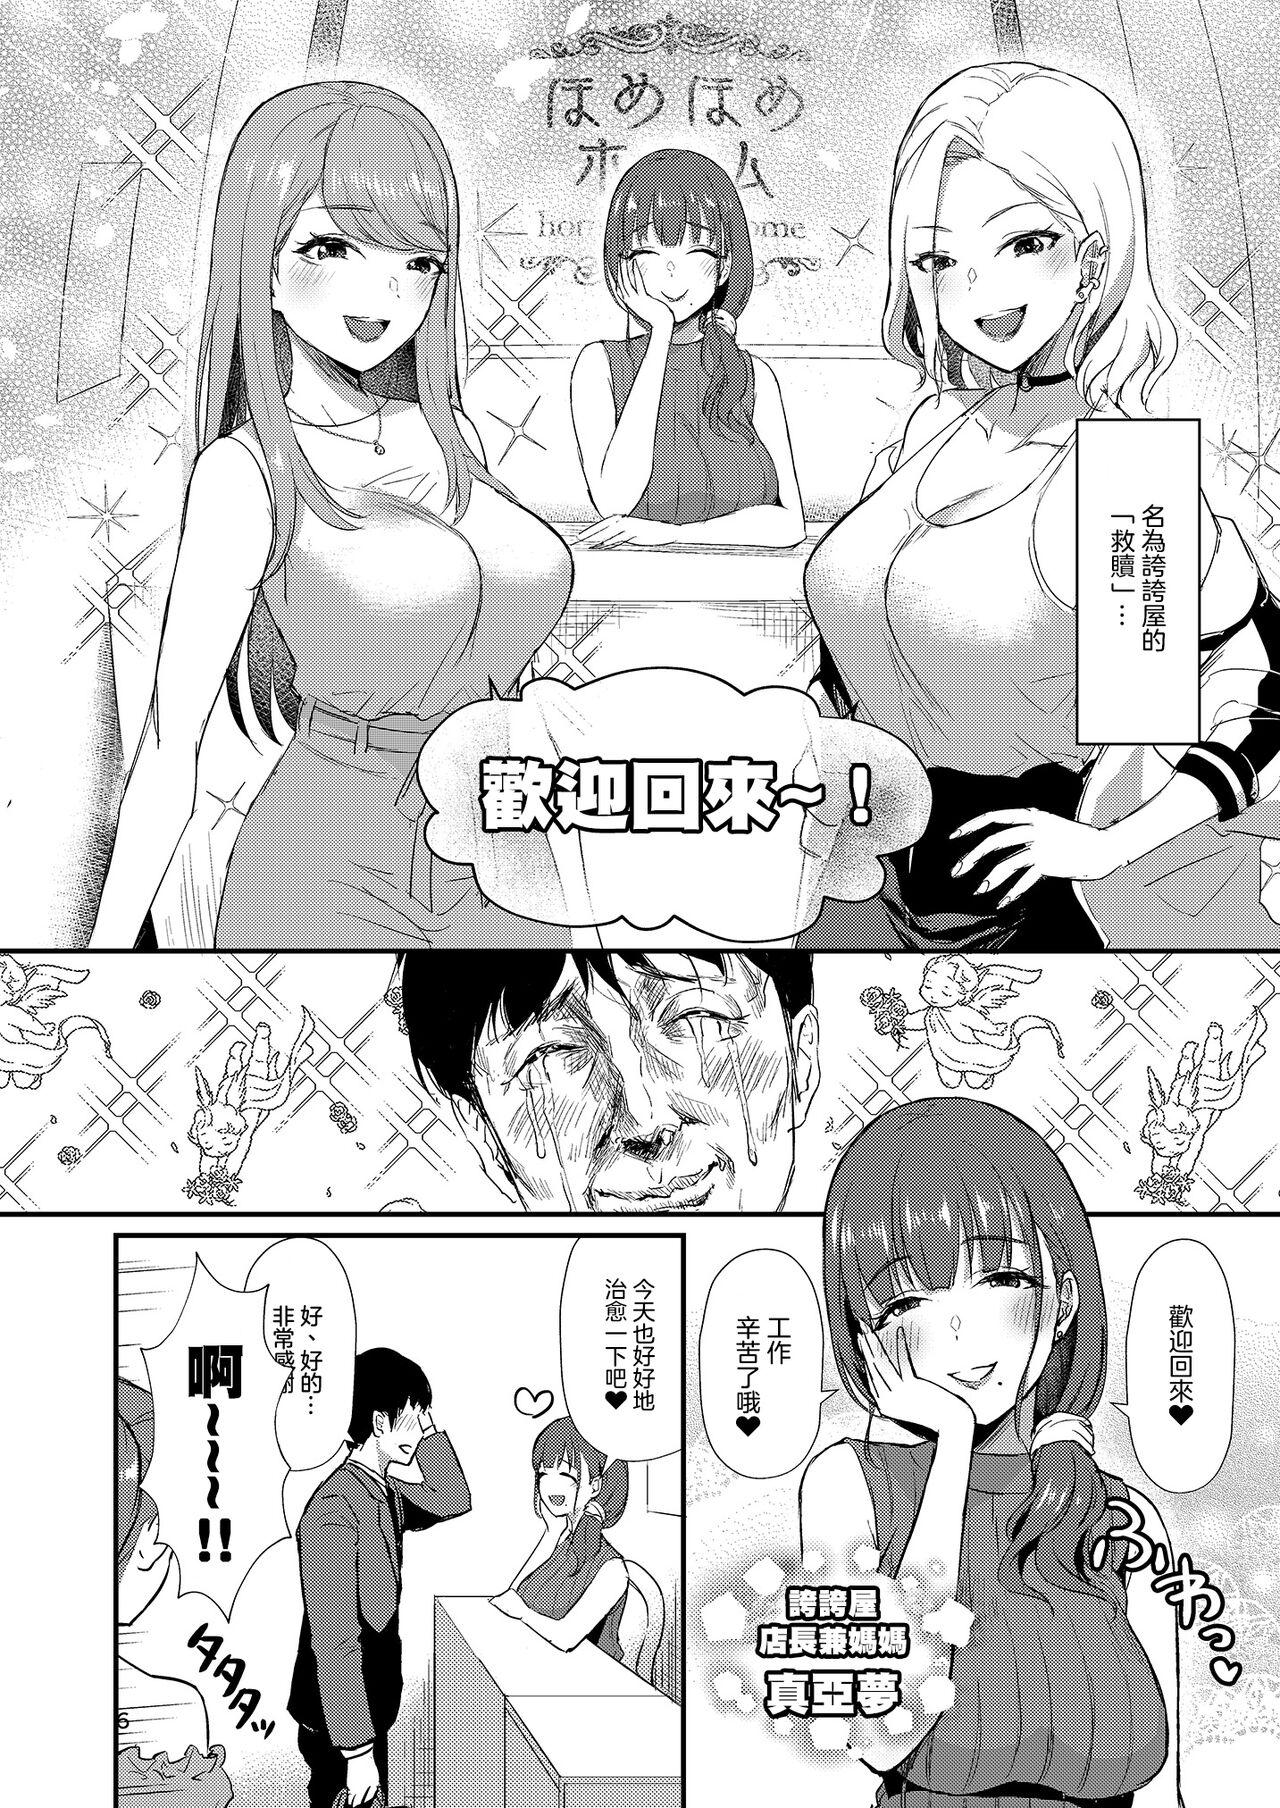 Girl Girl Homehome Home e Youkoso! - Welcome to Home Home Home! | 歡迎來到誇誇屋！ Gay Physicals - Page 7